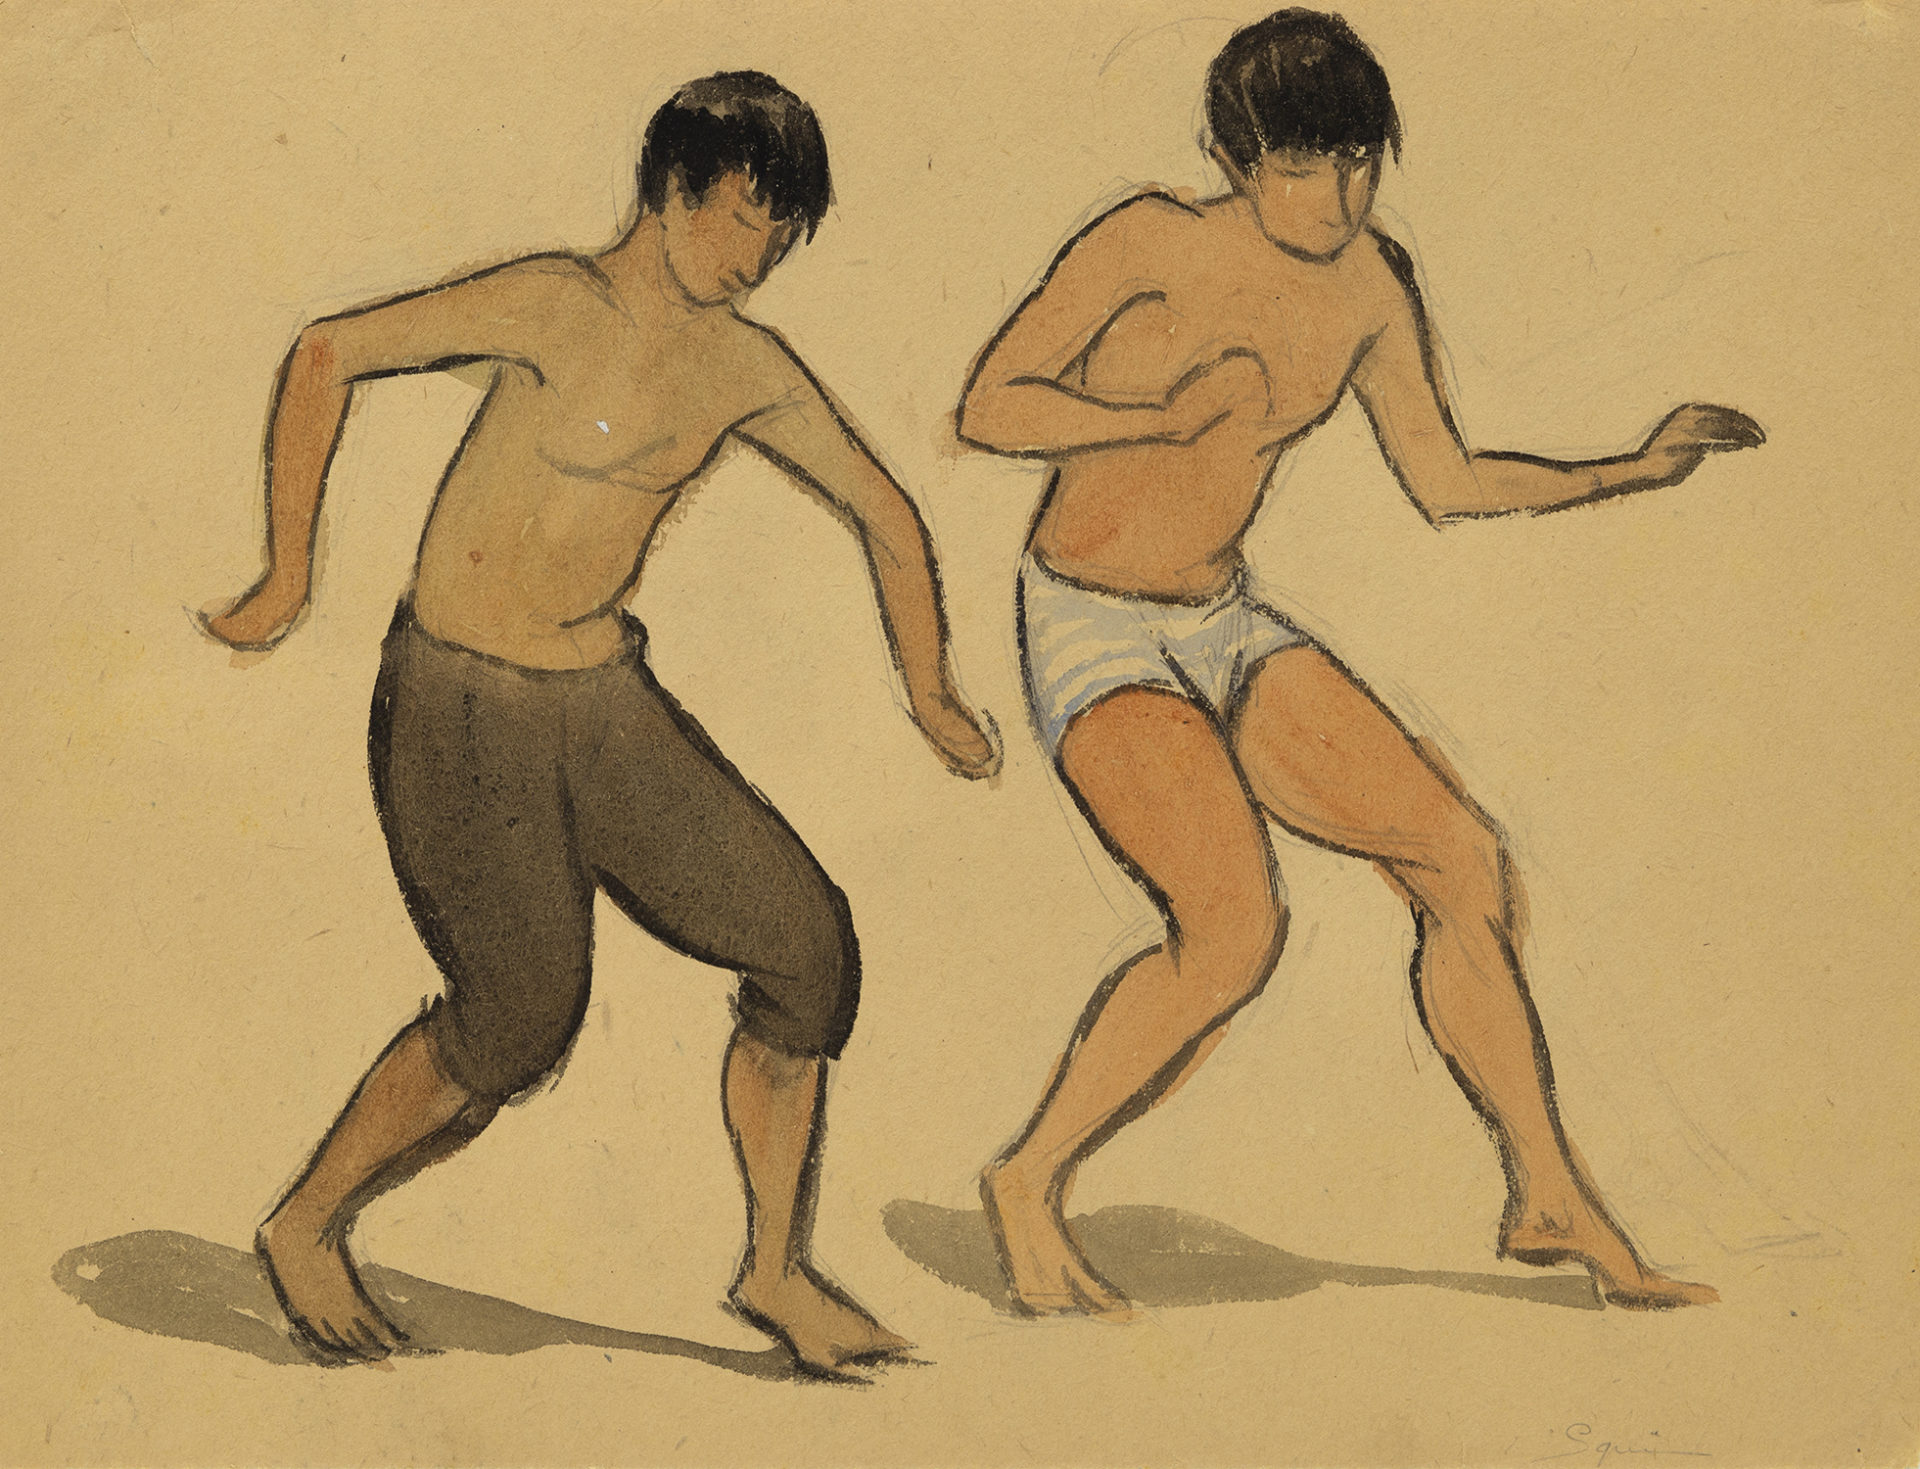 Two Dancing Boys, 1917-19, Watercolor and graphite, 8 15/16 x 11 7/8 inches (22.7 x 30.2 cm)